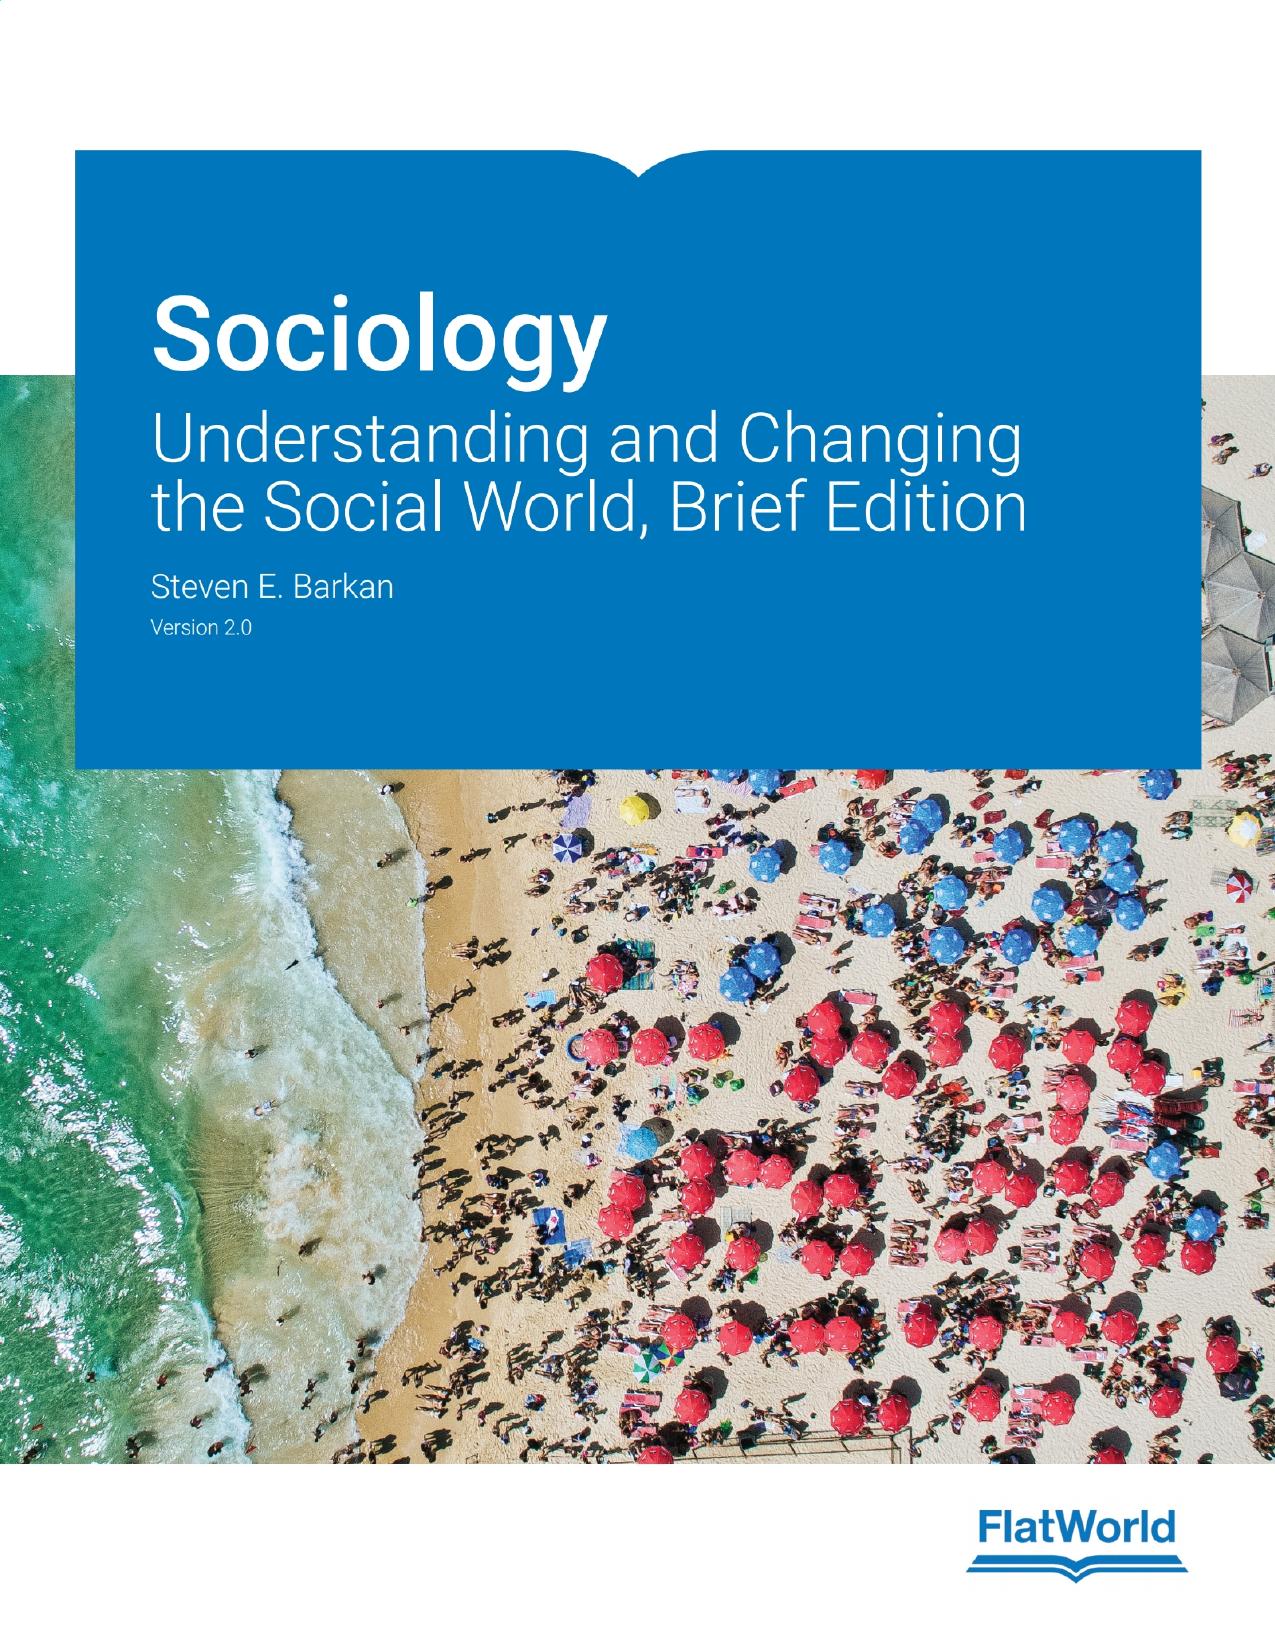 (eBook PDF)Sociology Understanding and Changing the Social World Brief Edition Version 2.0 by Steven E. Barkan